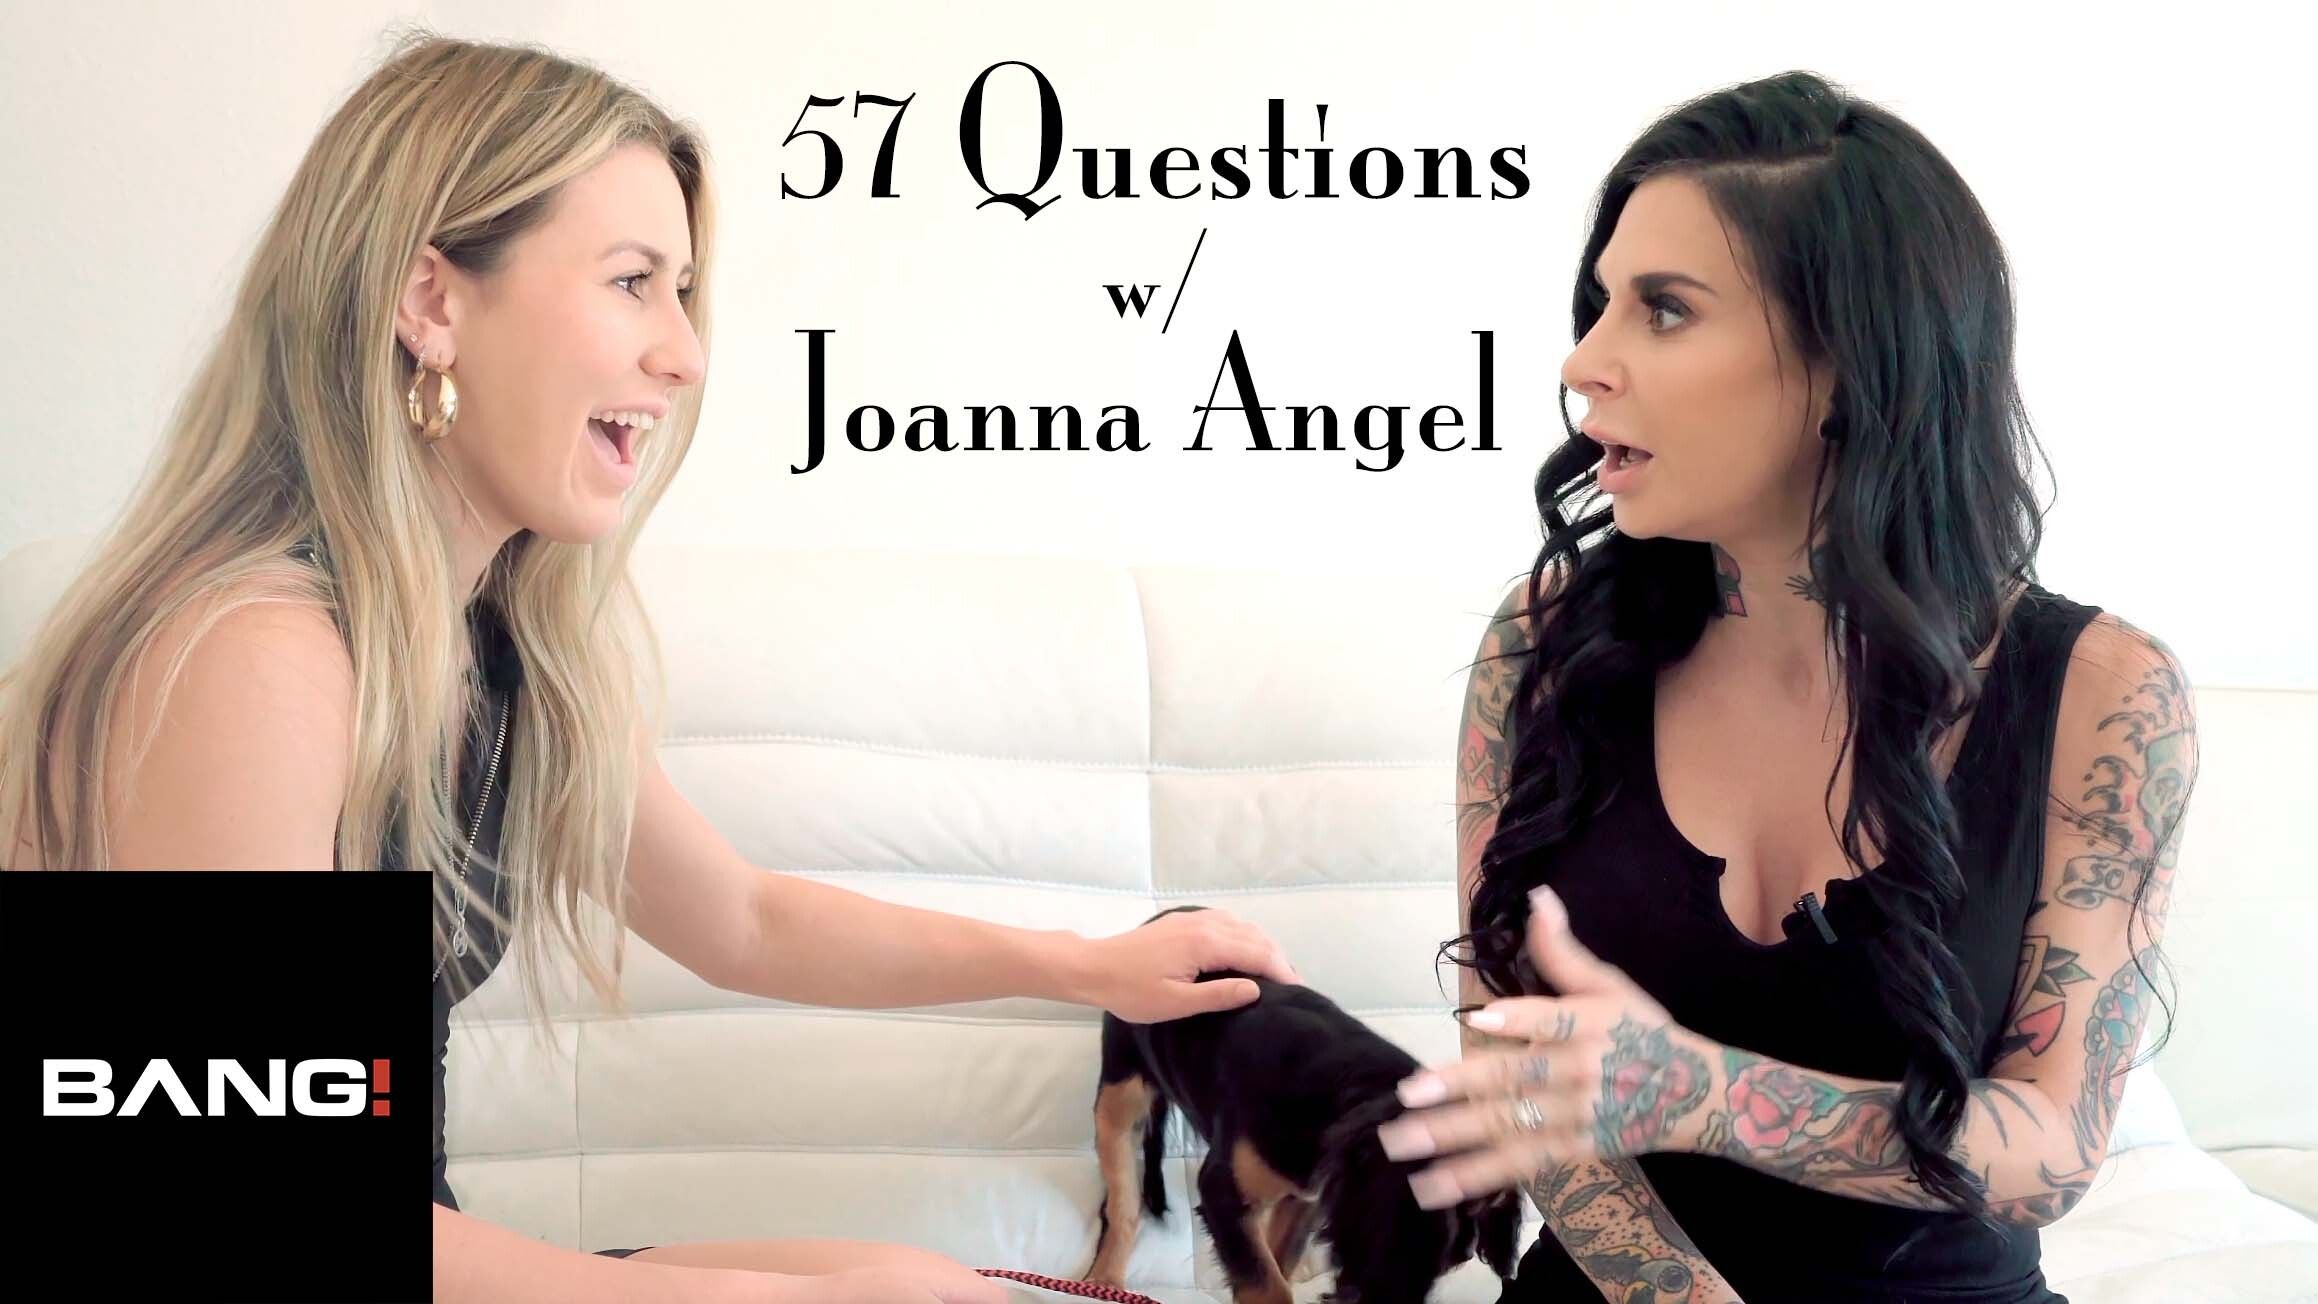 57 Questions with Joanna Angel!